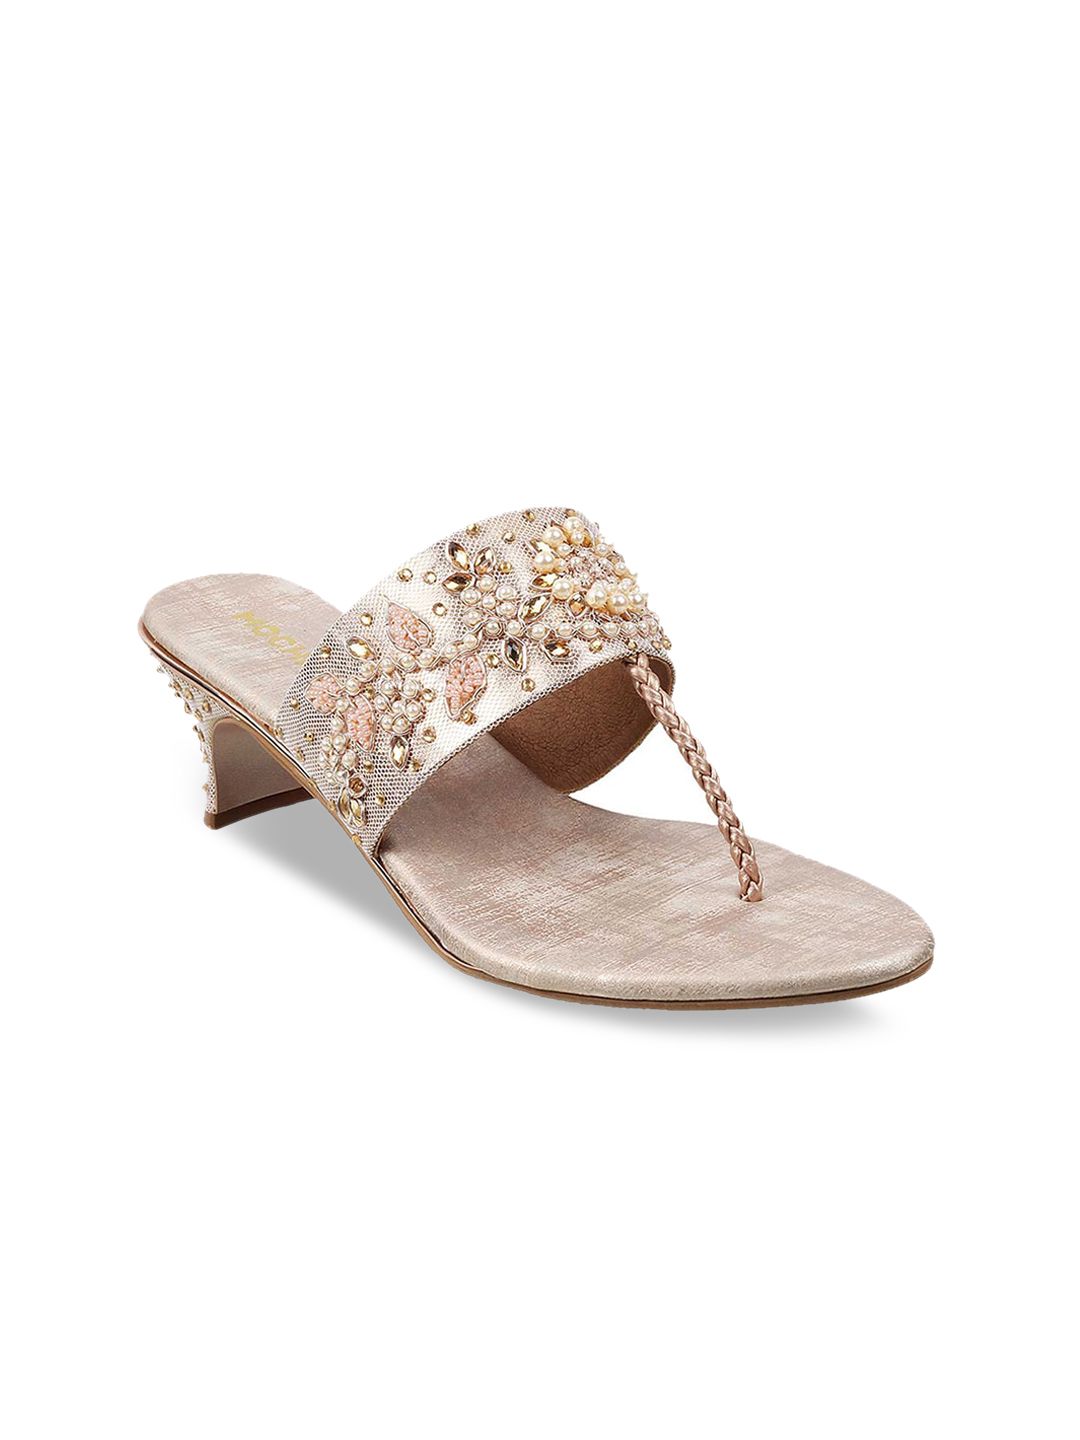 Mochi Gold-Toned Embellished Ethnic Kitten Sandals Price in India